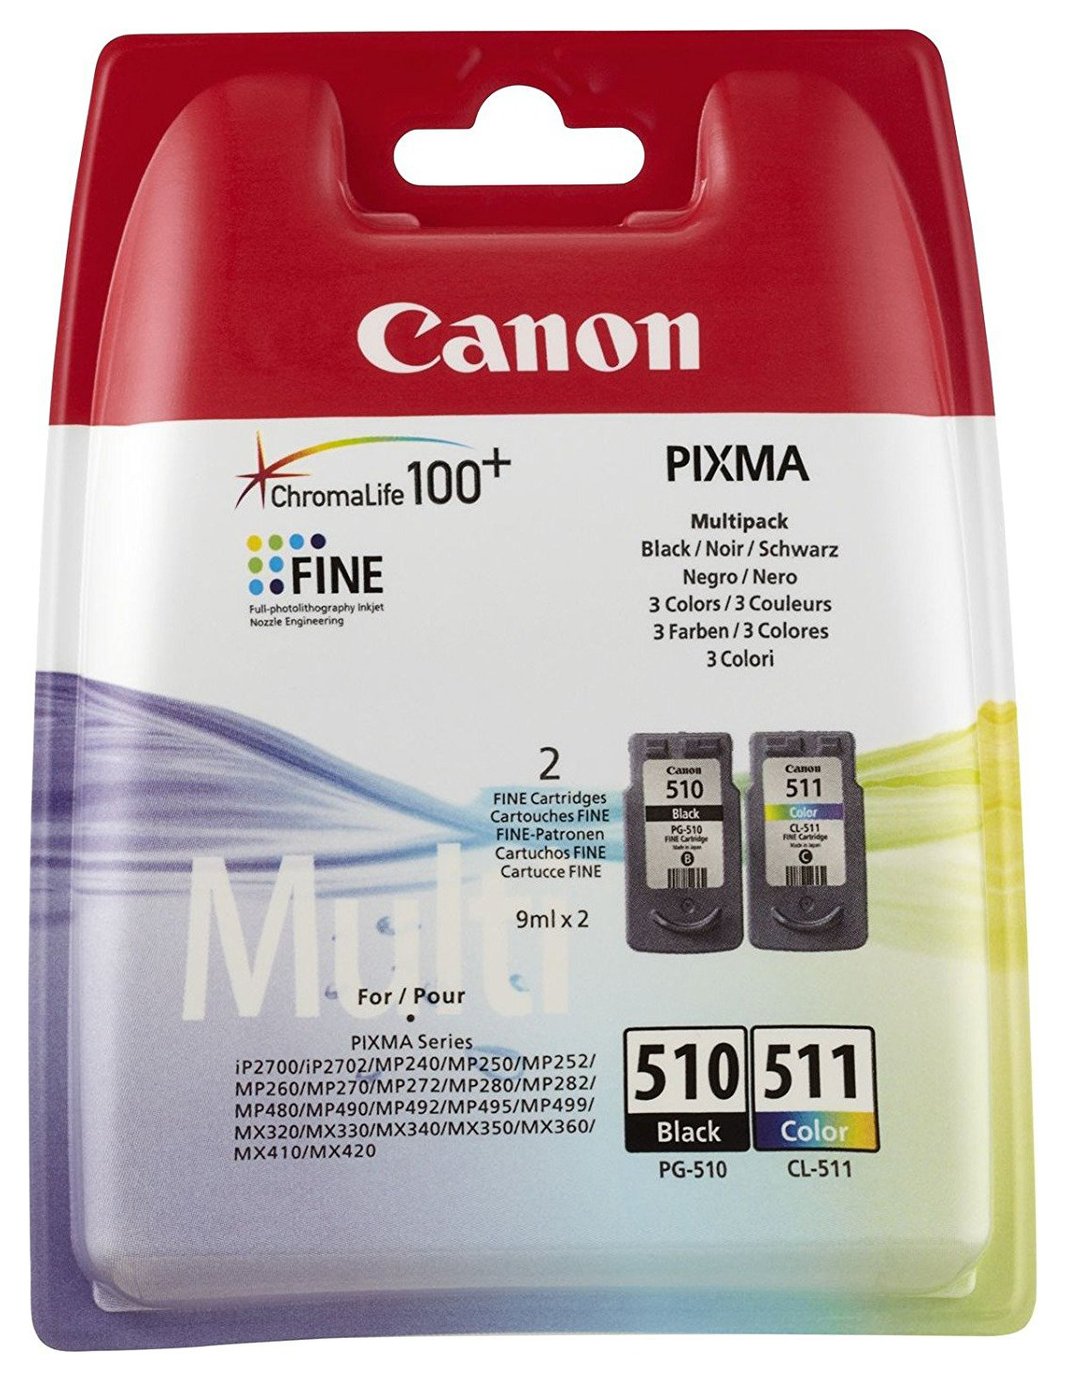 Canon PG-510/CL-511 Multipack Ink Cartridge